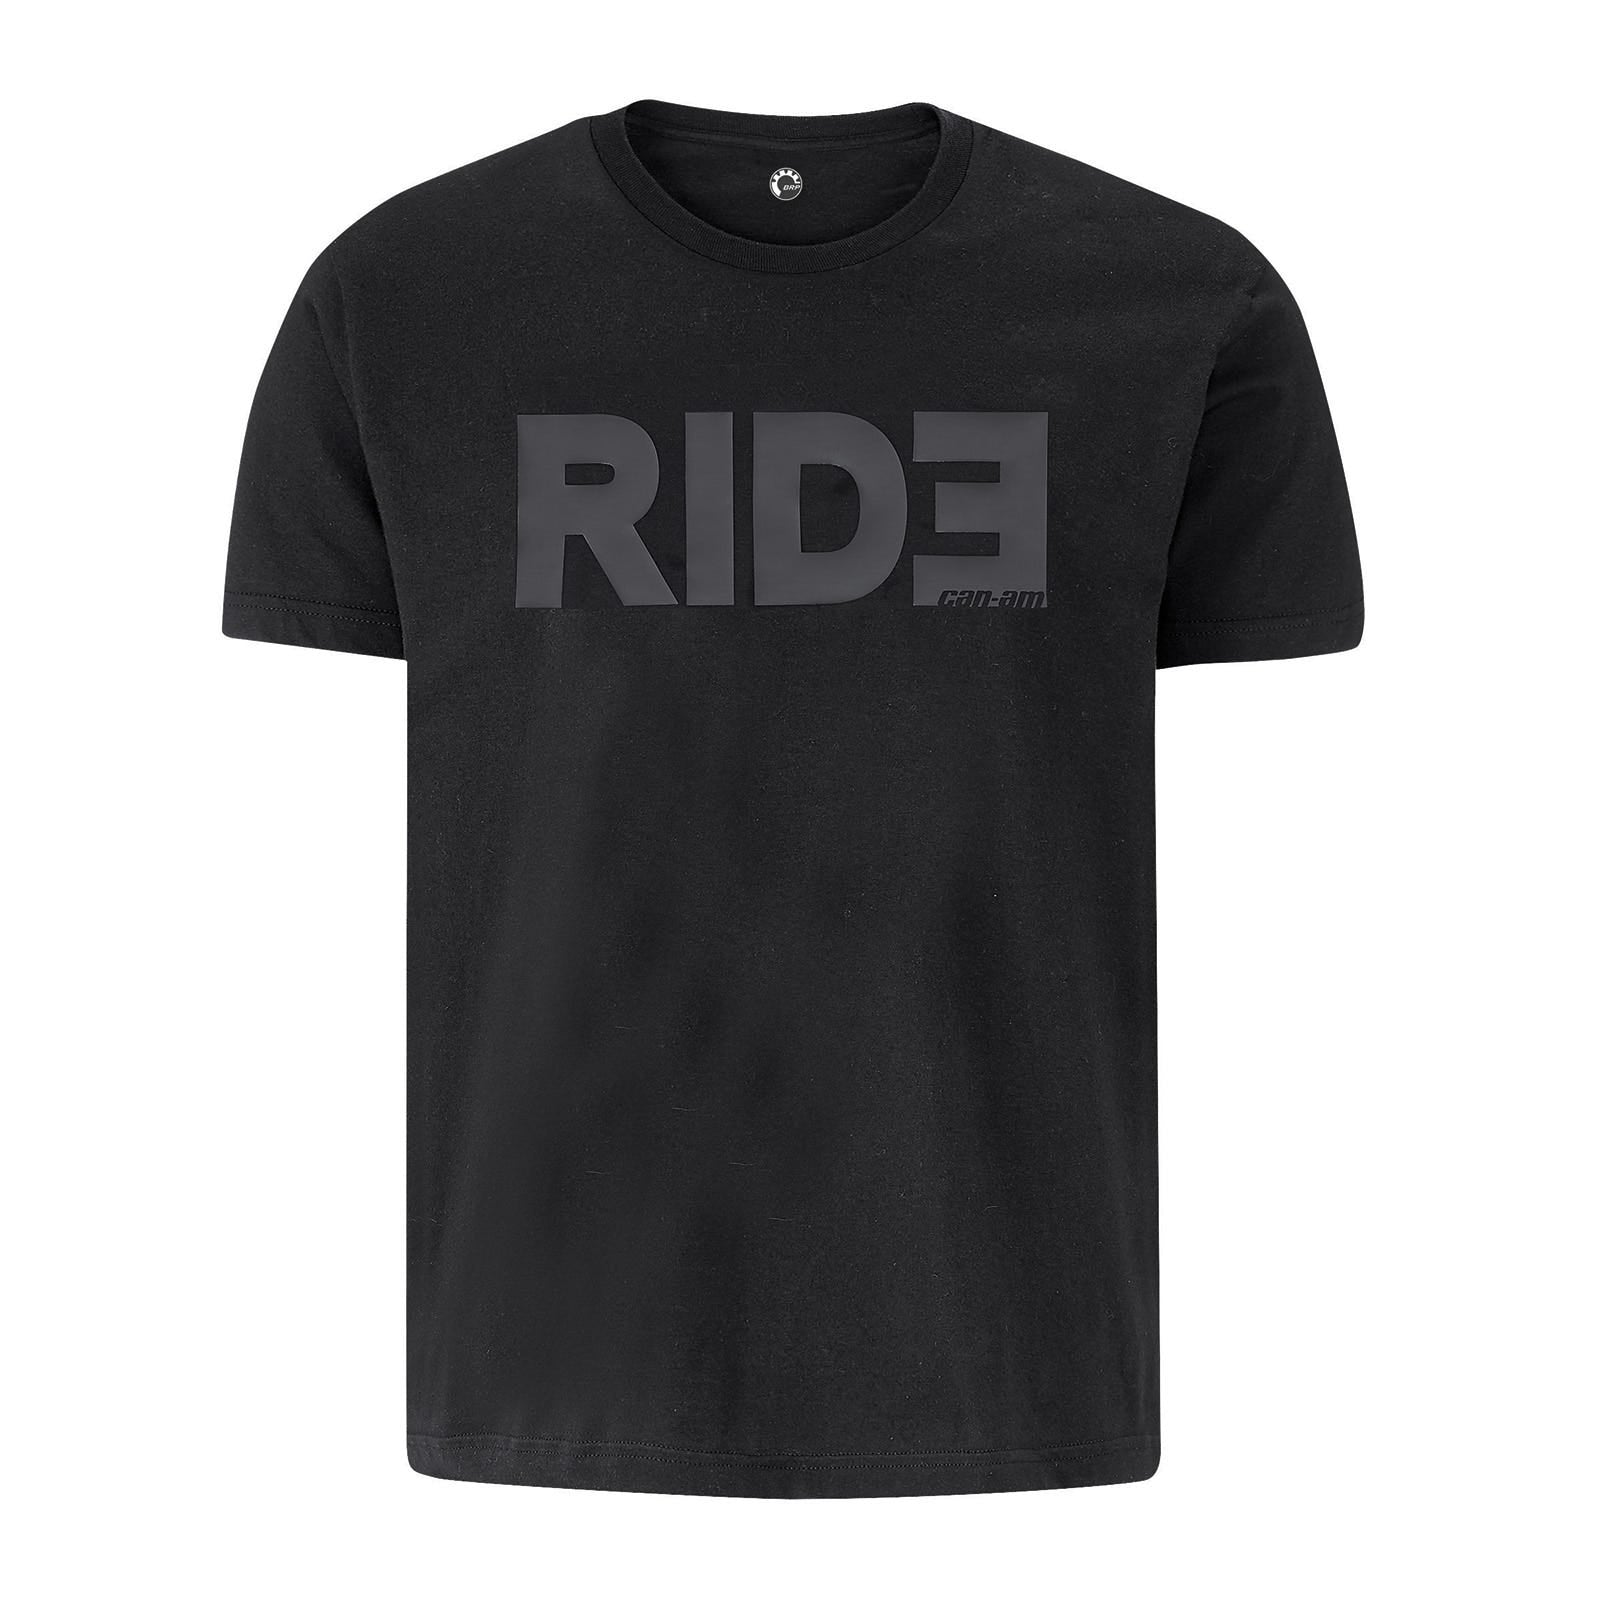 Can-am On road Ride Tee 454196 - The Parts Lodge